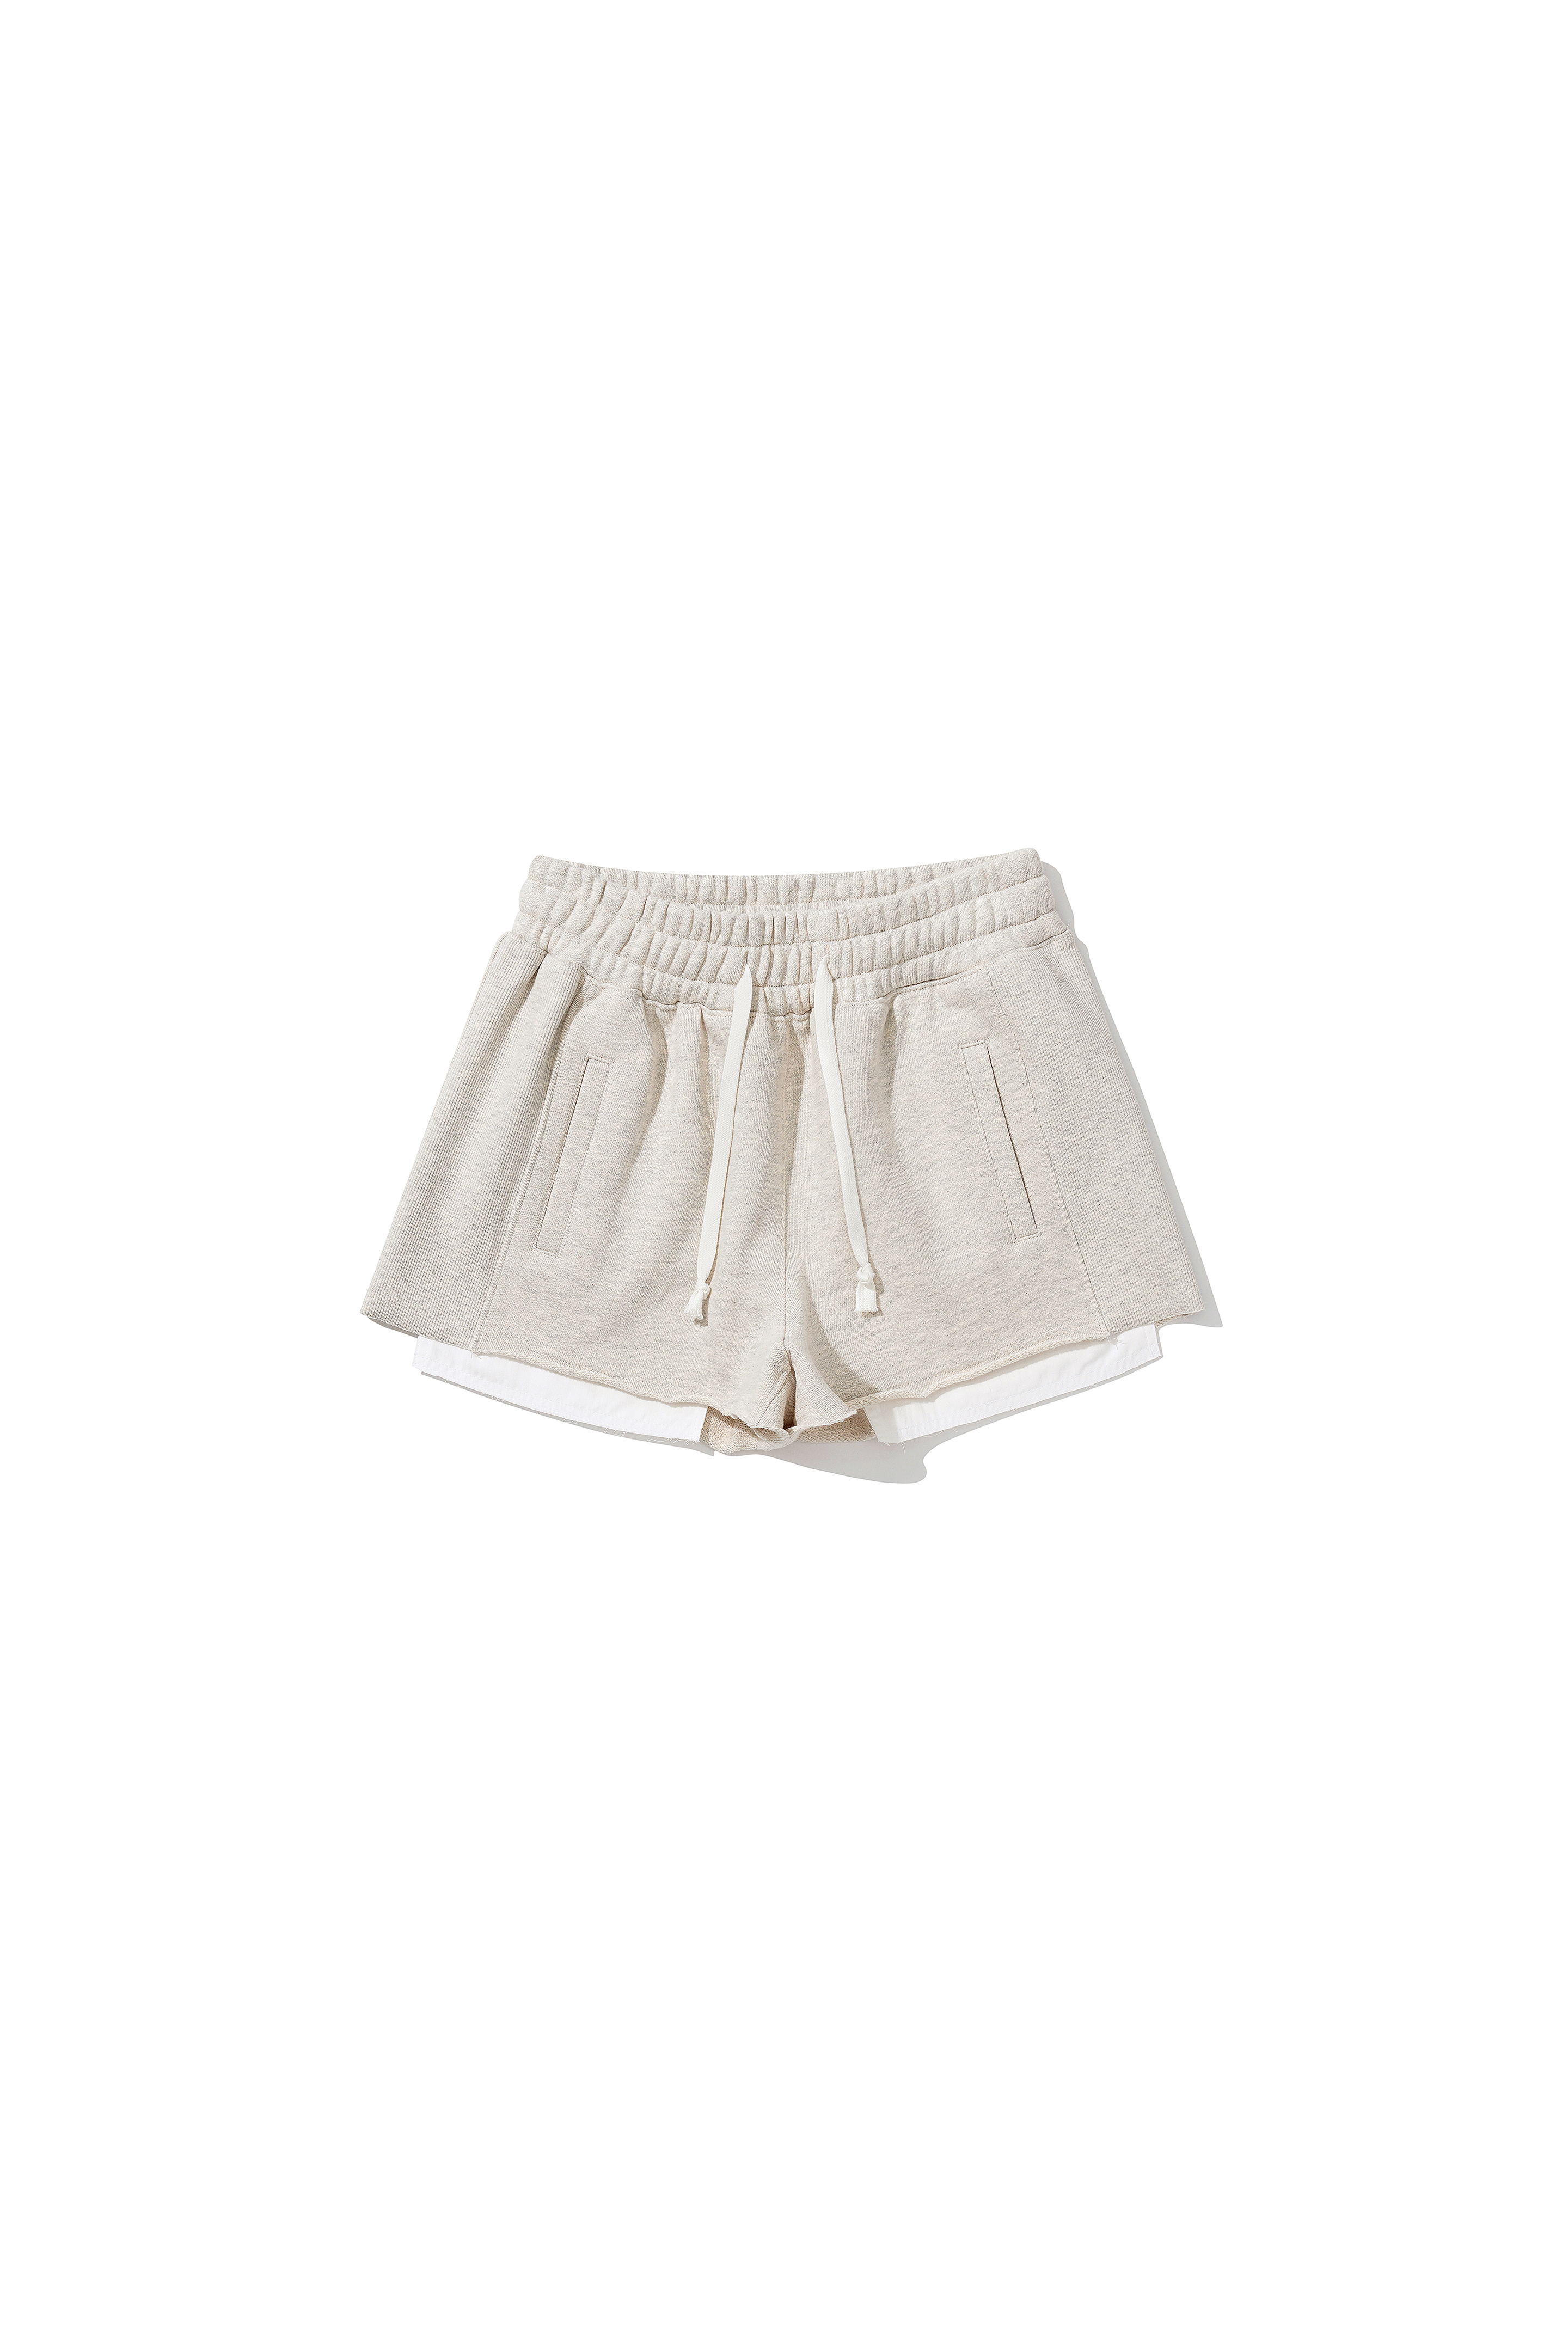 DAY-OFF 006 Cotton Shorts Oatmeal